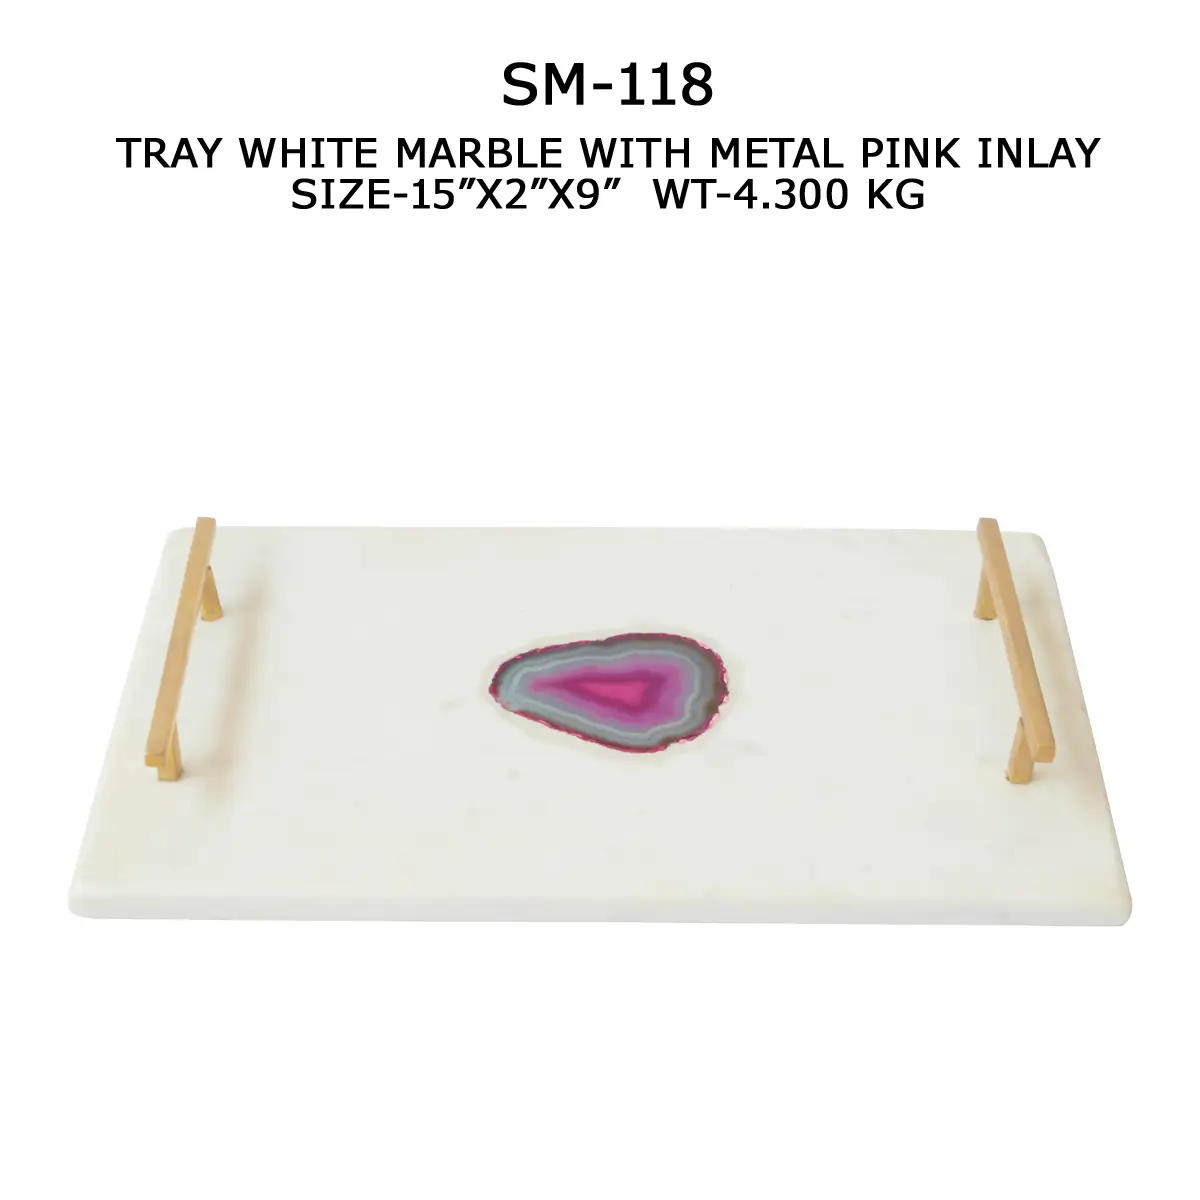 TRAY WITH METAL PINK INLAY WHITE MARBLE